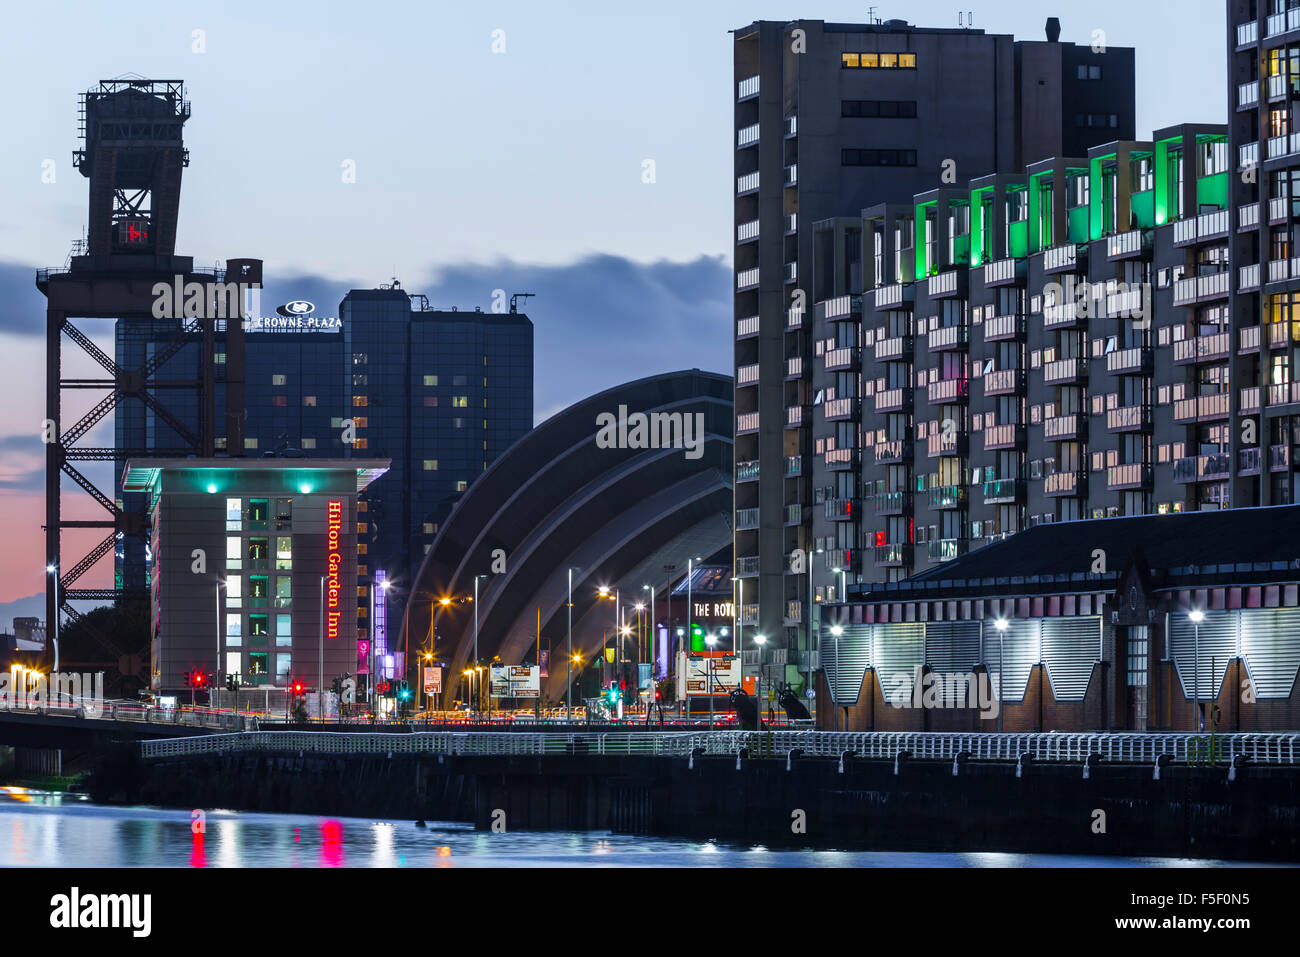 The Finnieston waterfront beside the River Clyde in Glasgow at dusk, Scotland, UK Stock Photo